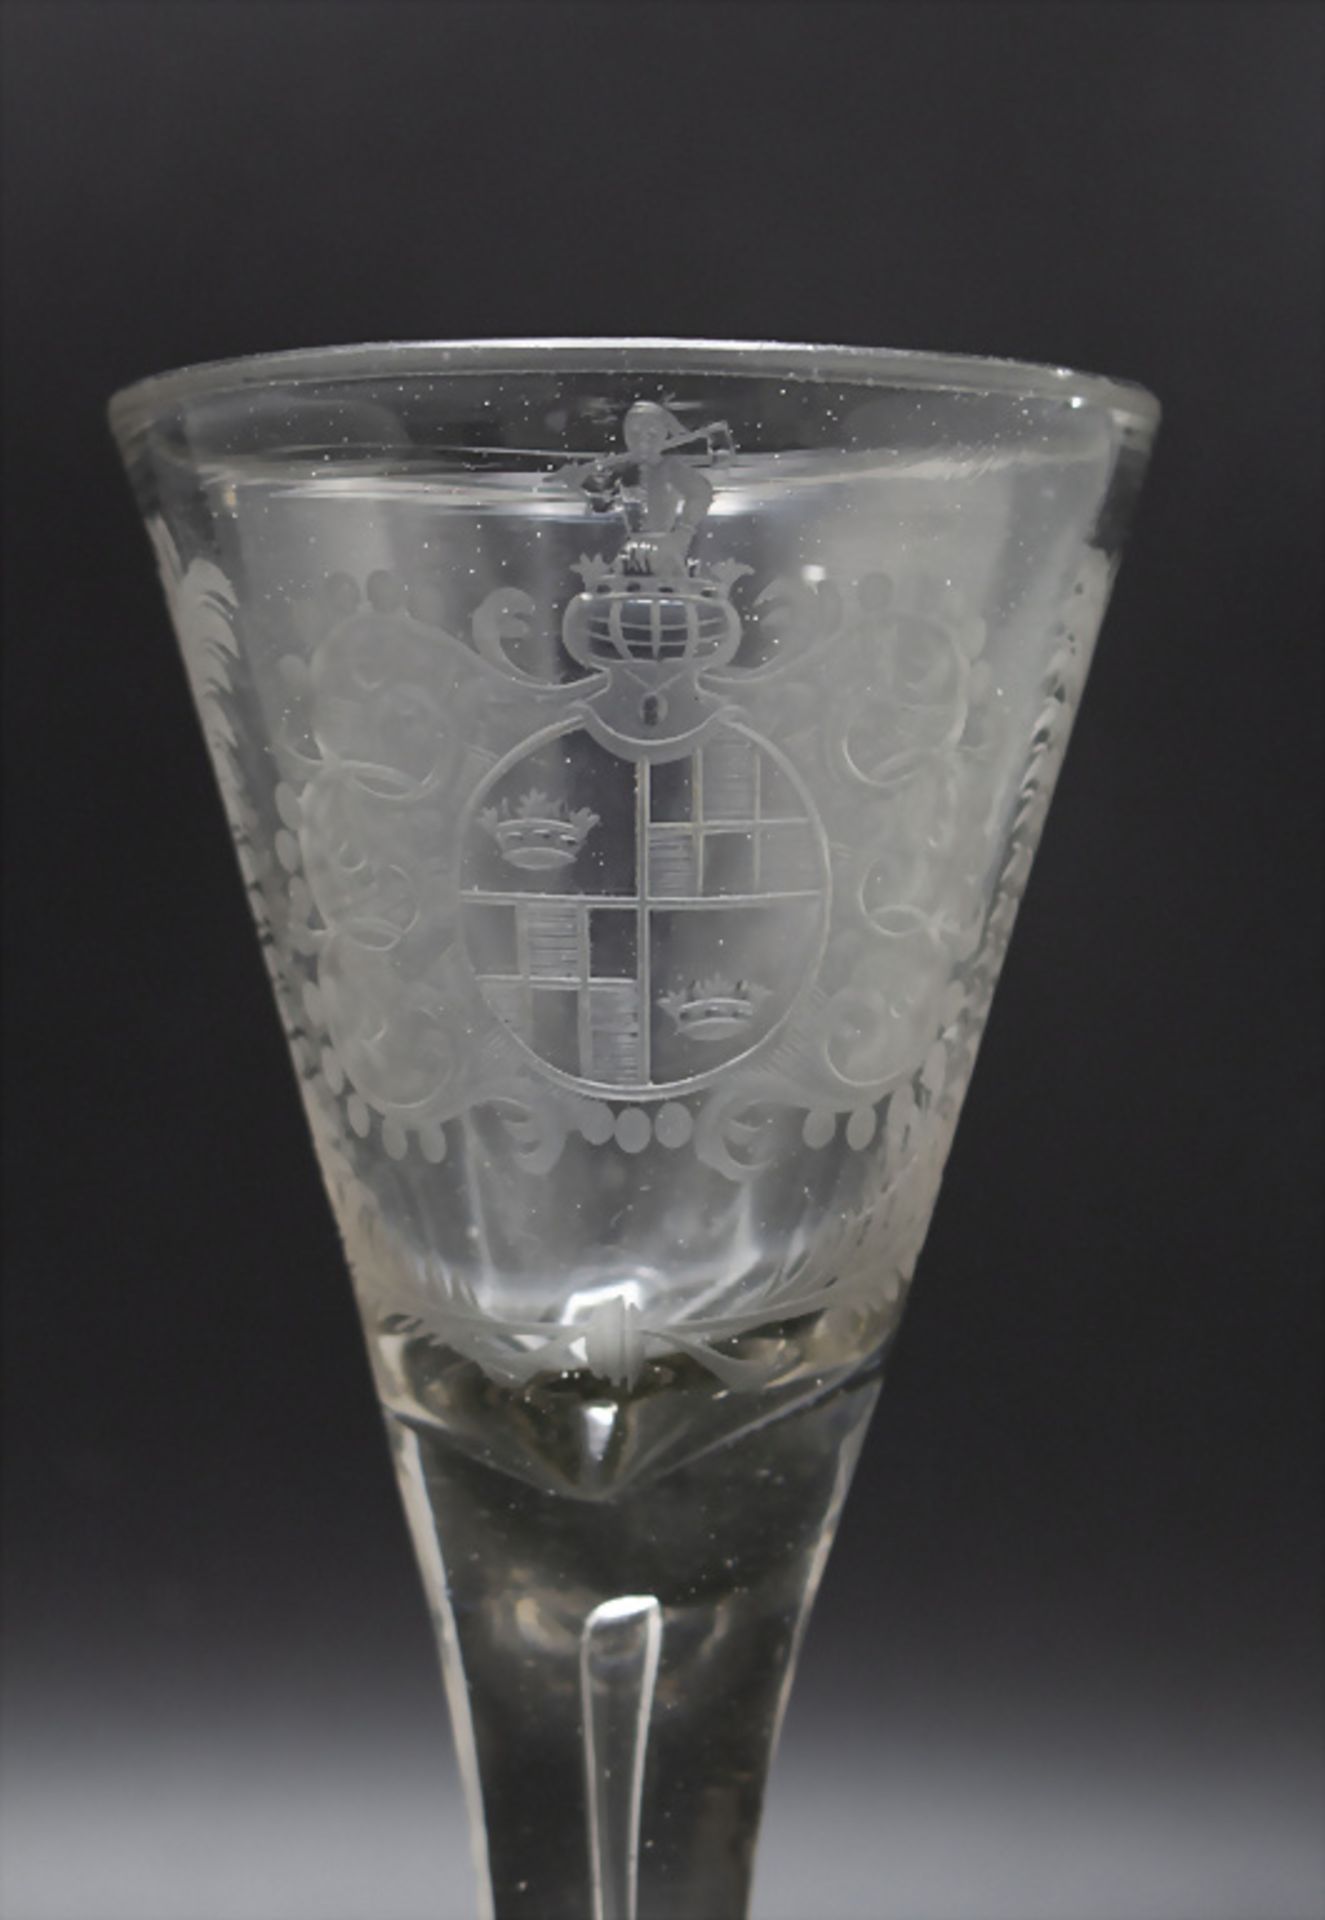 Spitzkelch mit Wappen / A glass goblet with coat of arms, Weserbergland oder Lauenstein, 18. Jh. - Image 2 of 3